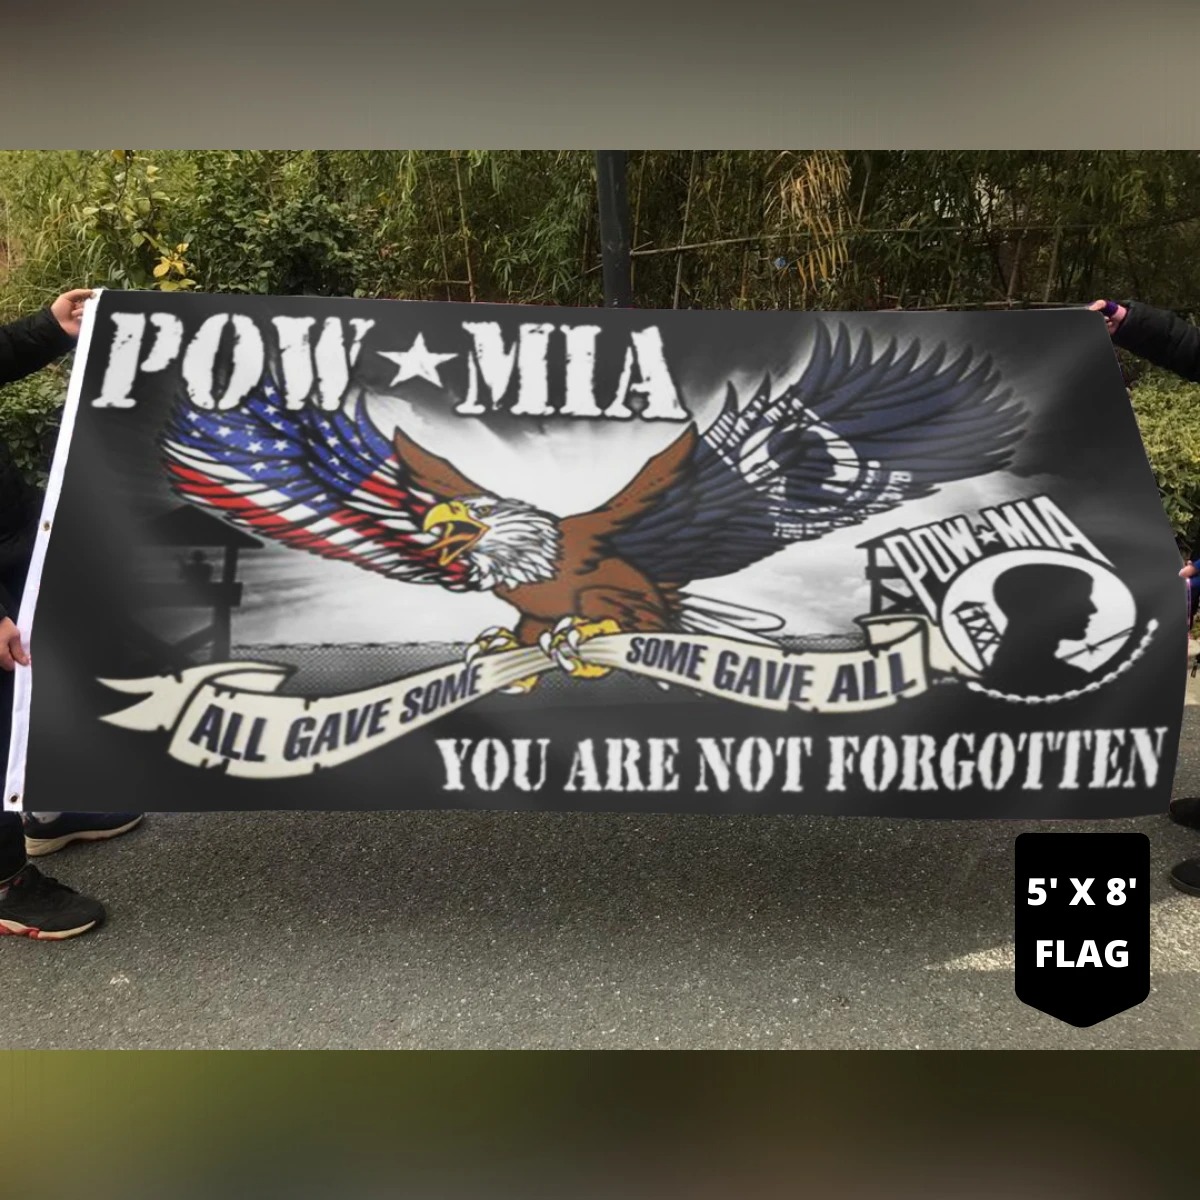 Pow mid all gave some some gave all you are not forgotten flag3